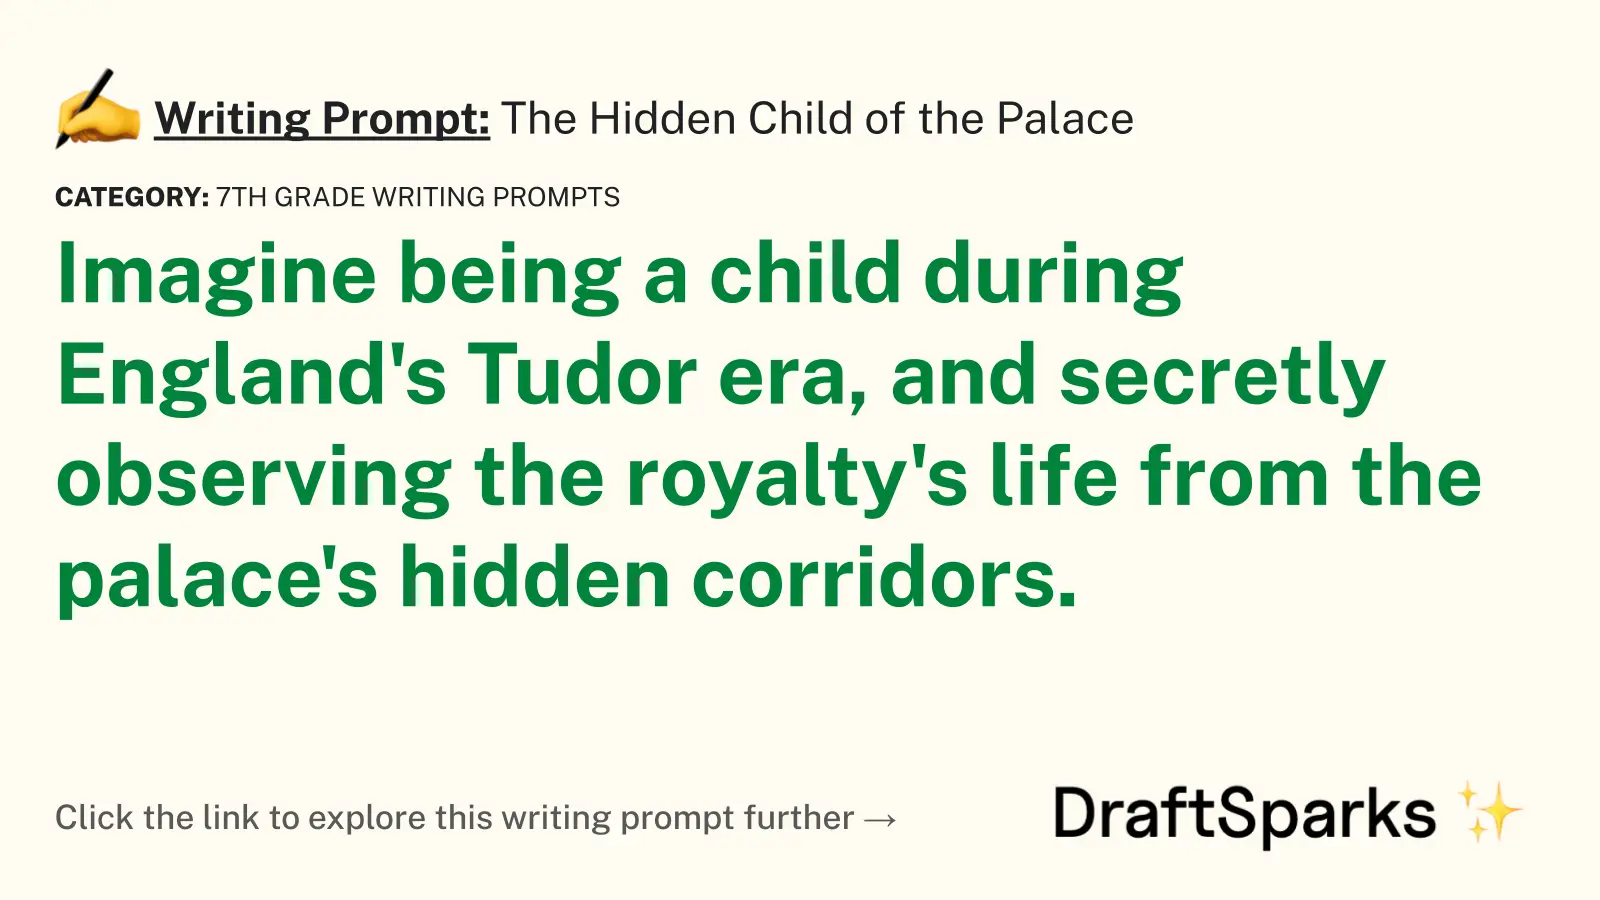 The Hidden Child of the Palace